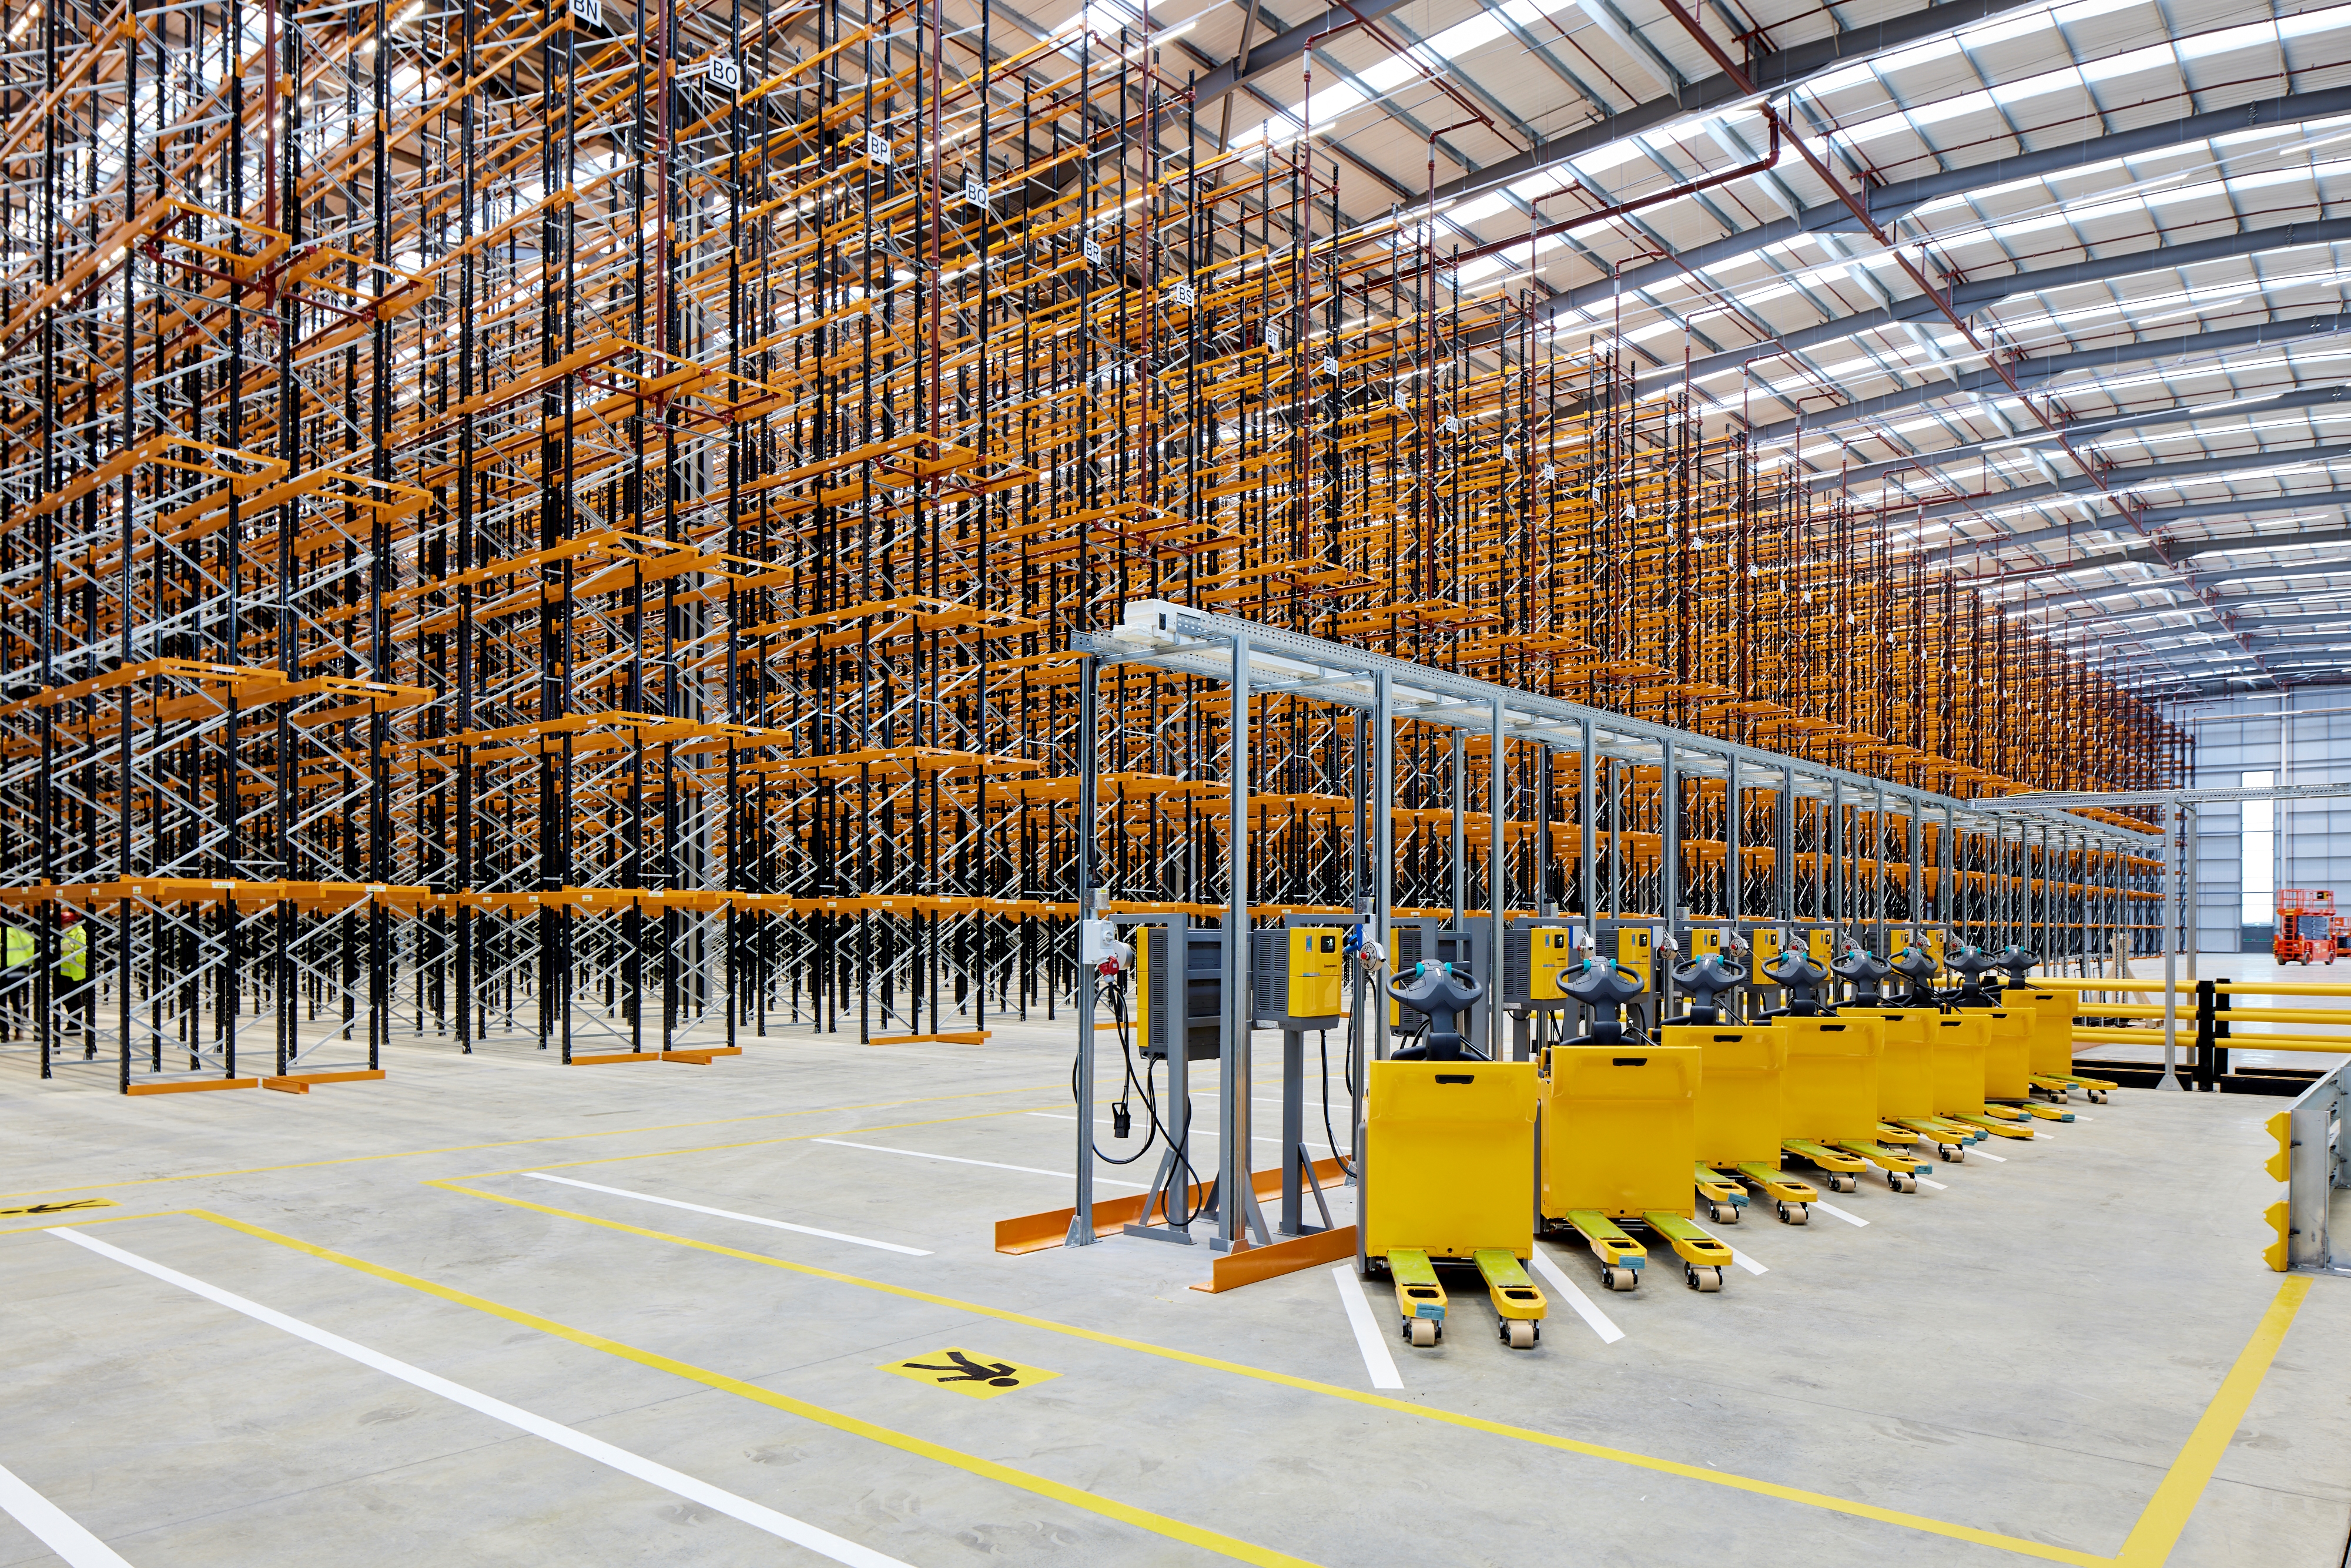 Racking and Forklifts in a warehouse